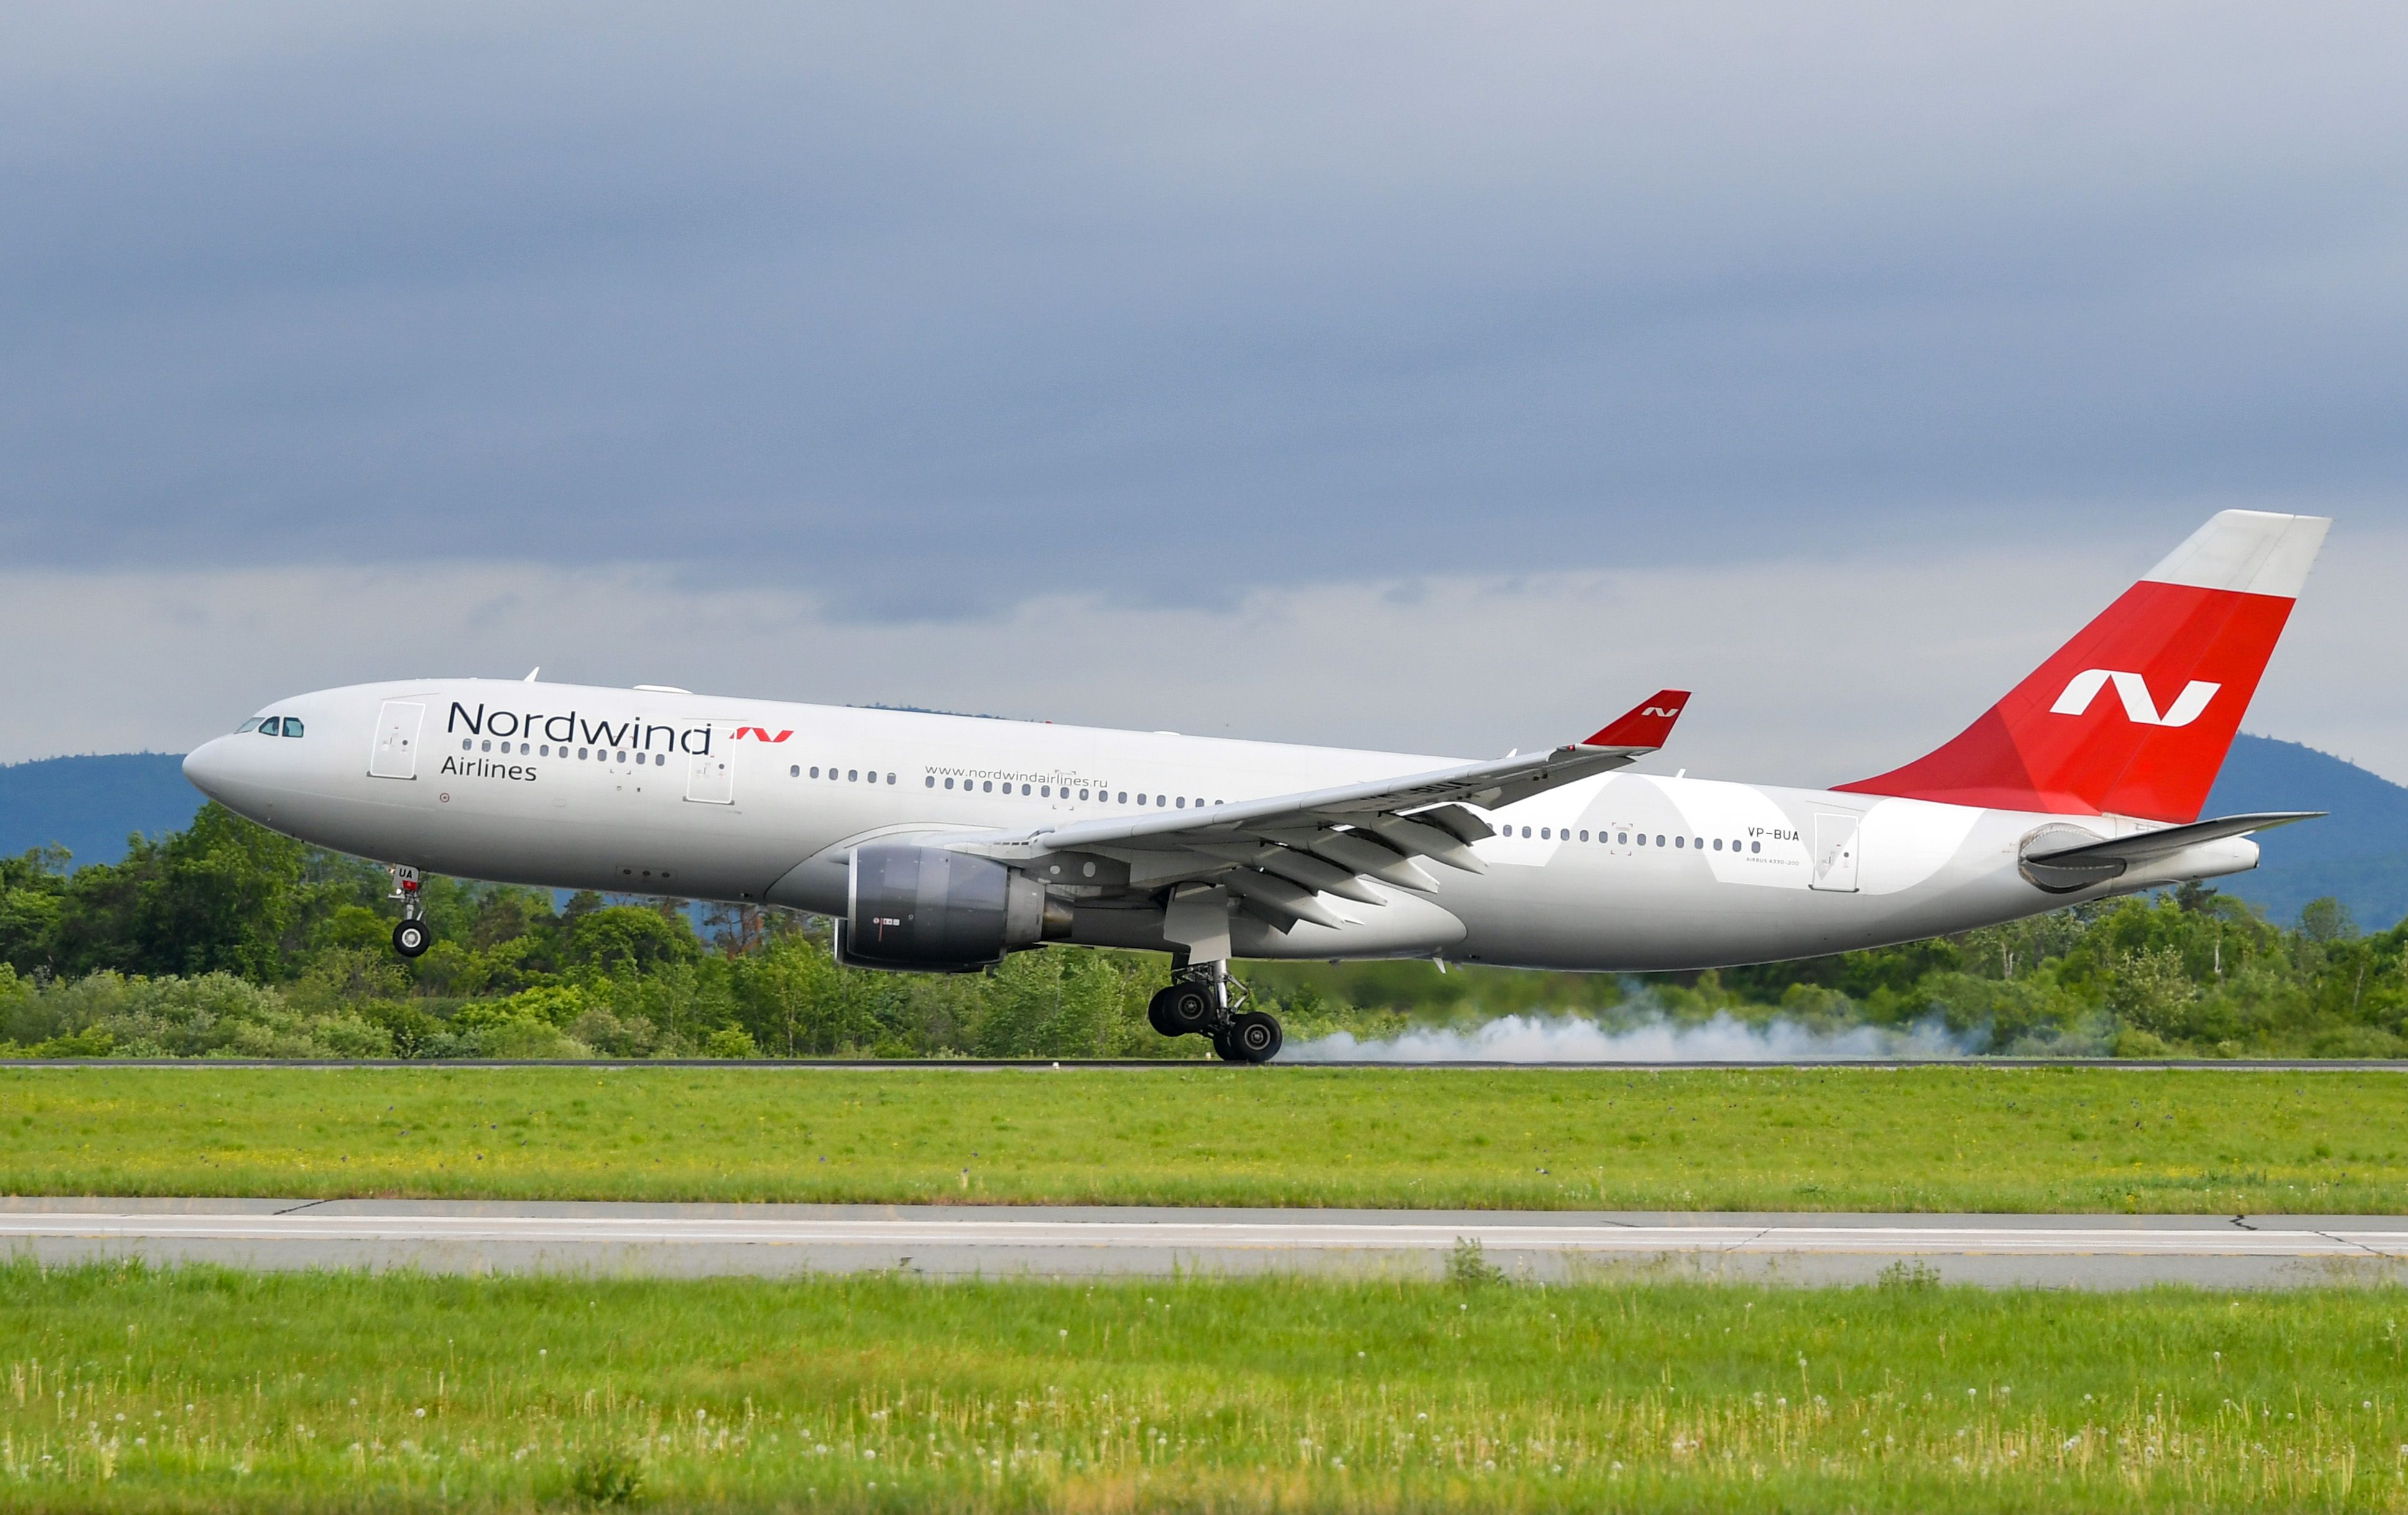 A Nordwind Airlines aircraft